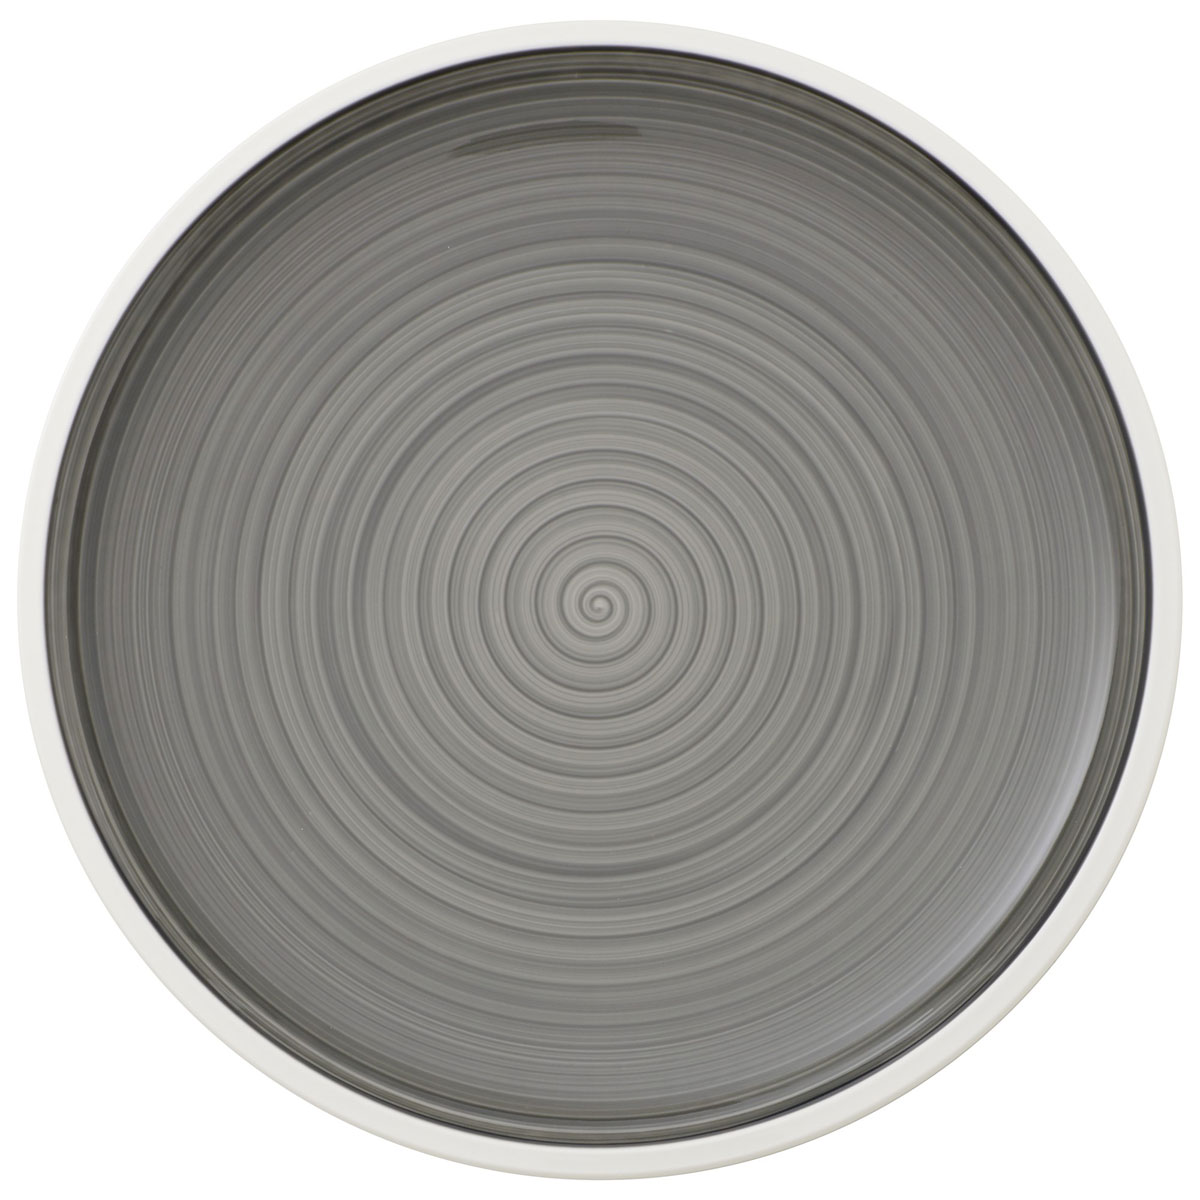 Villeroy and Boch Manufacture Gris Dinner Plate